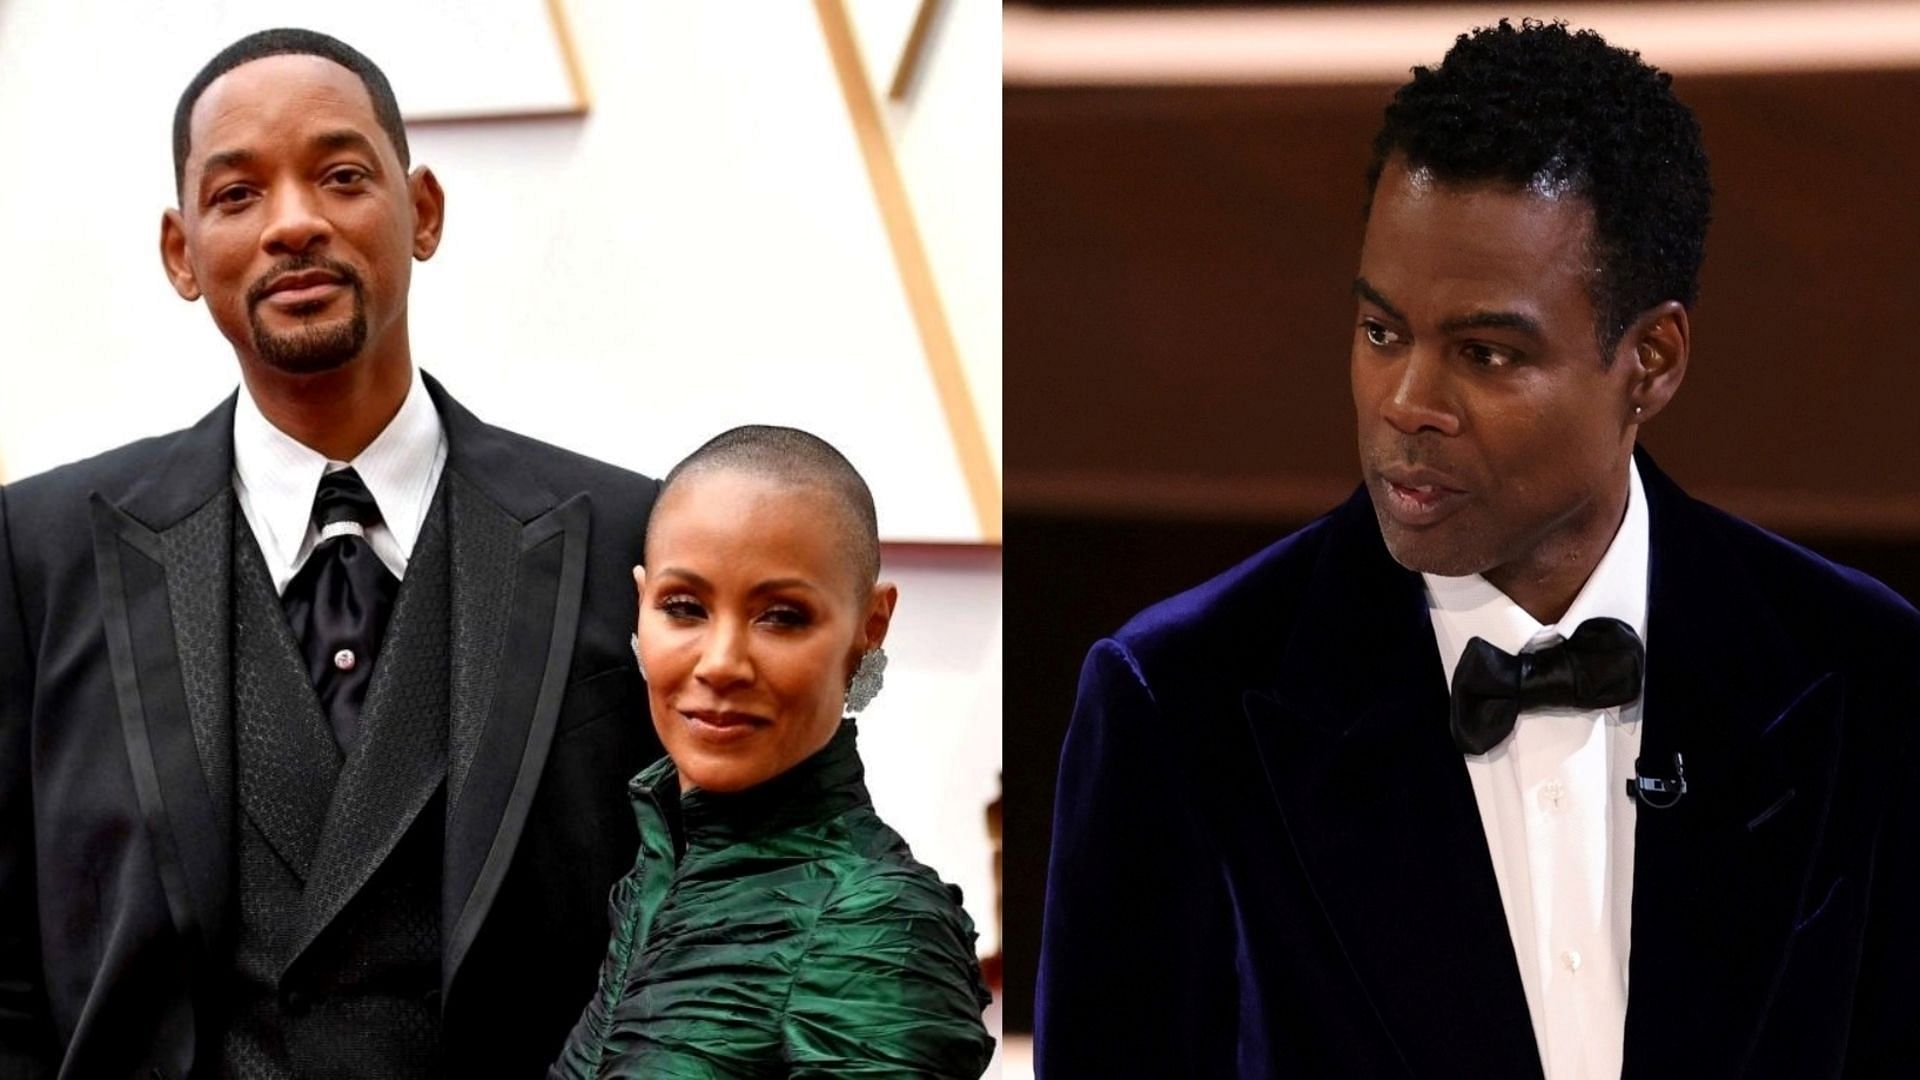 Will Smith, Jada Pinkett Smith, and Chris Rock at the Oscars 2022 (Image via Angela Weiss/Getty Images, and Neilson Barnard/Getty Images)